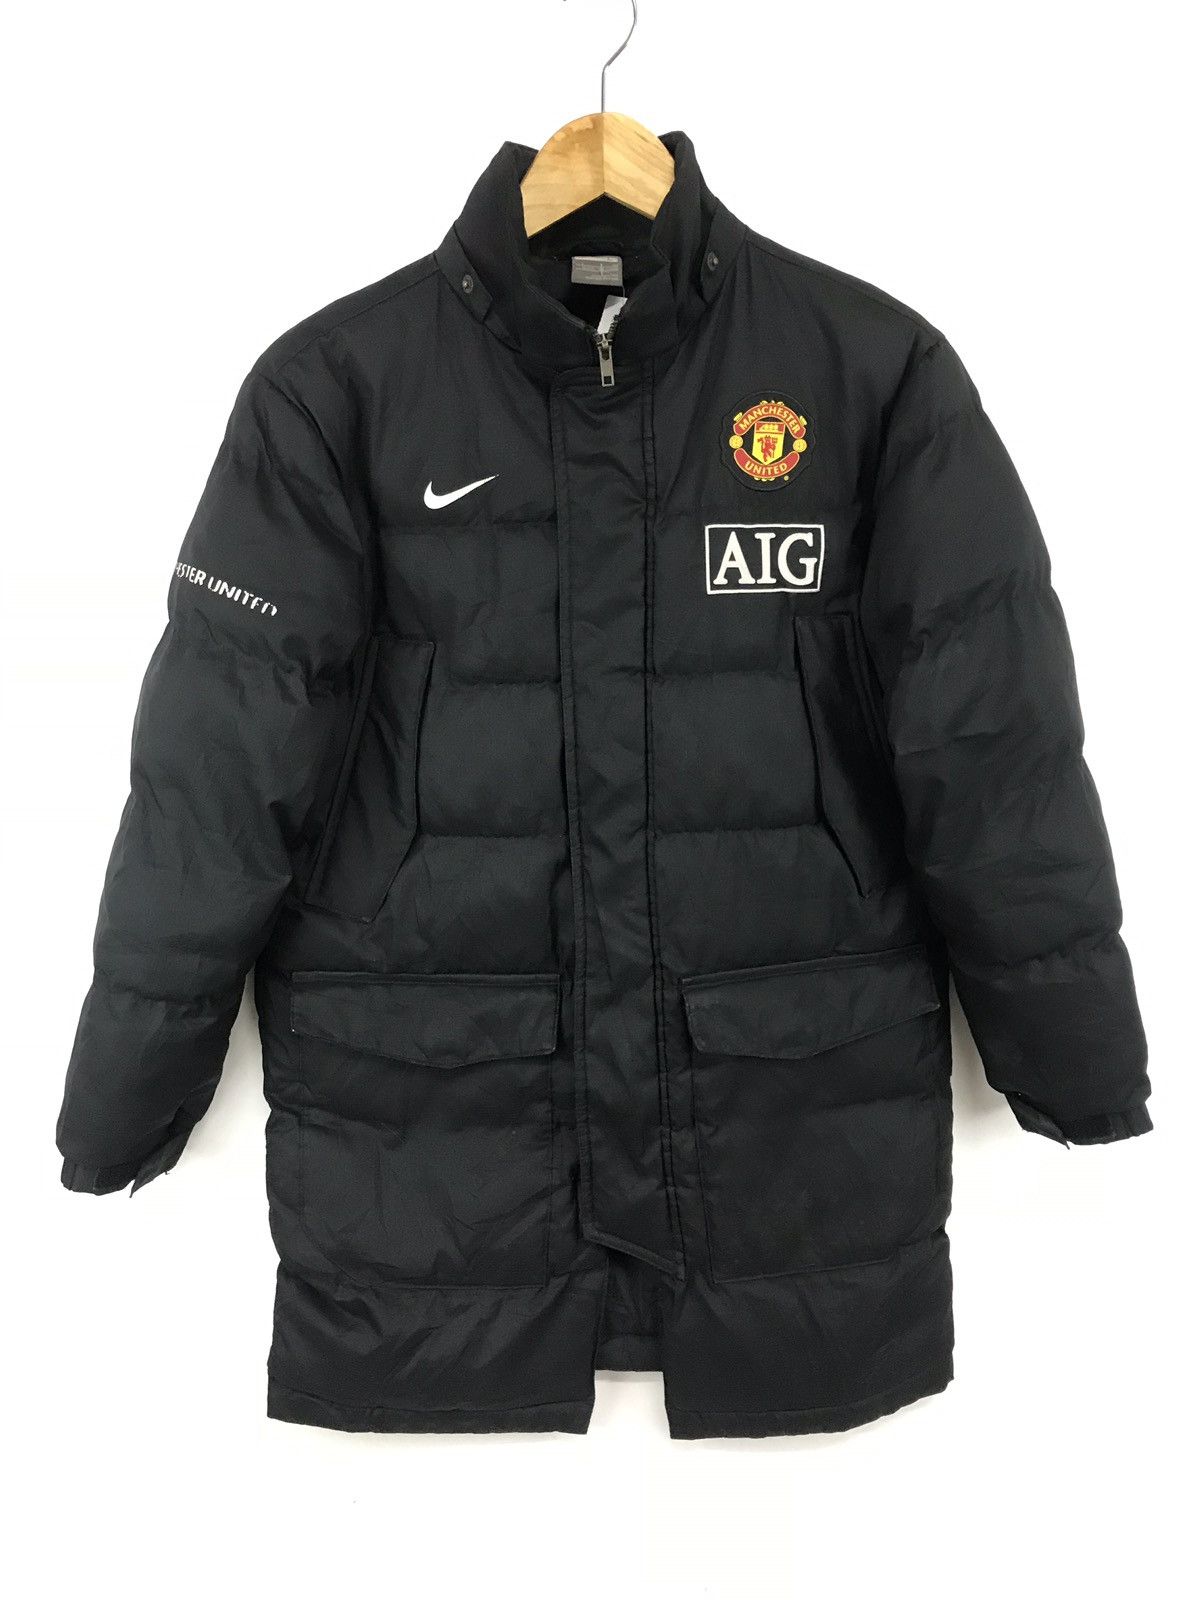 Nike Vintage Manchester United AIG puffer Jacket Size US L / EU 52-54 / 3 - 1 Preview